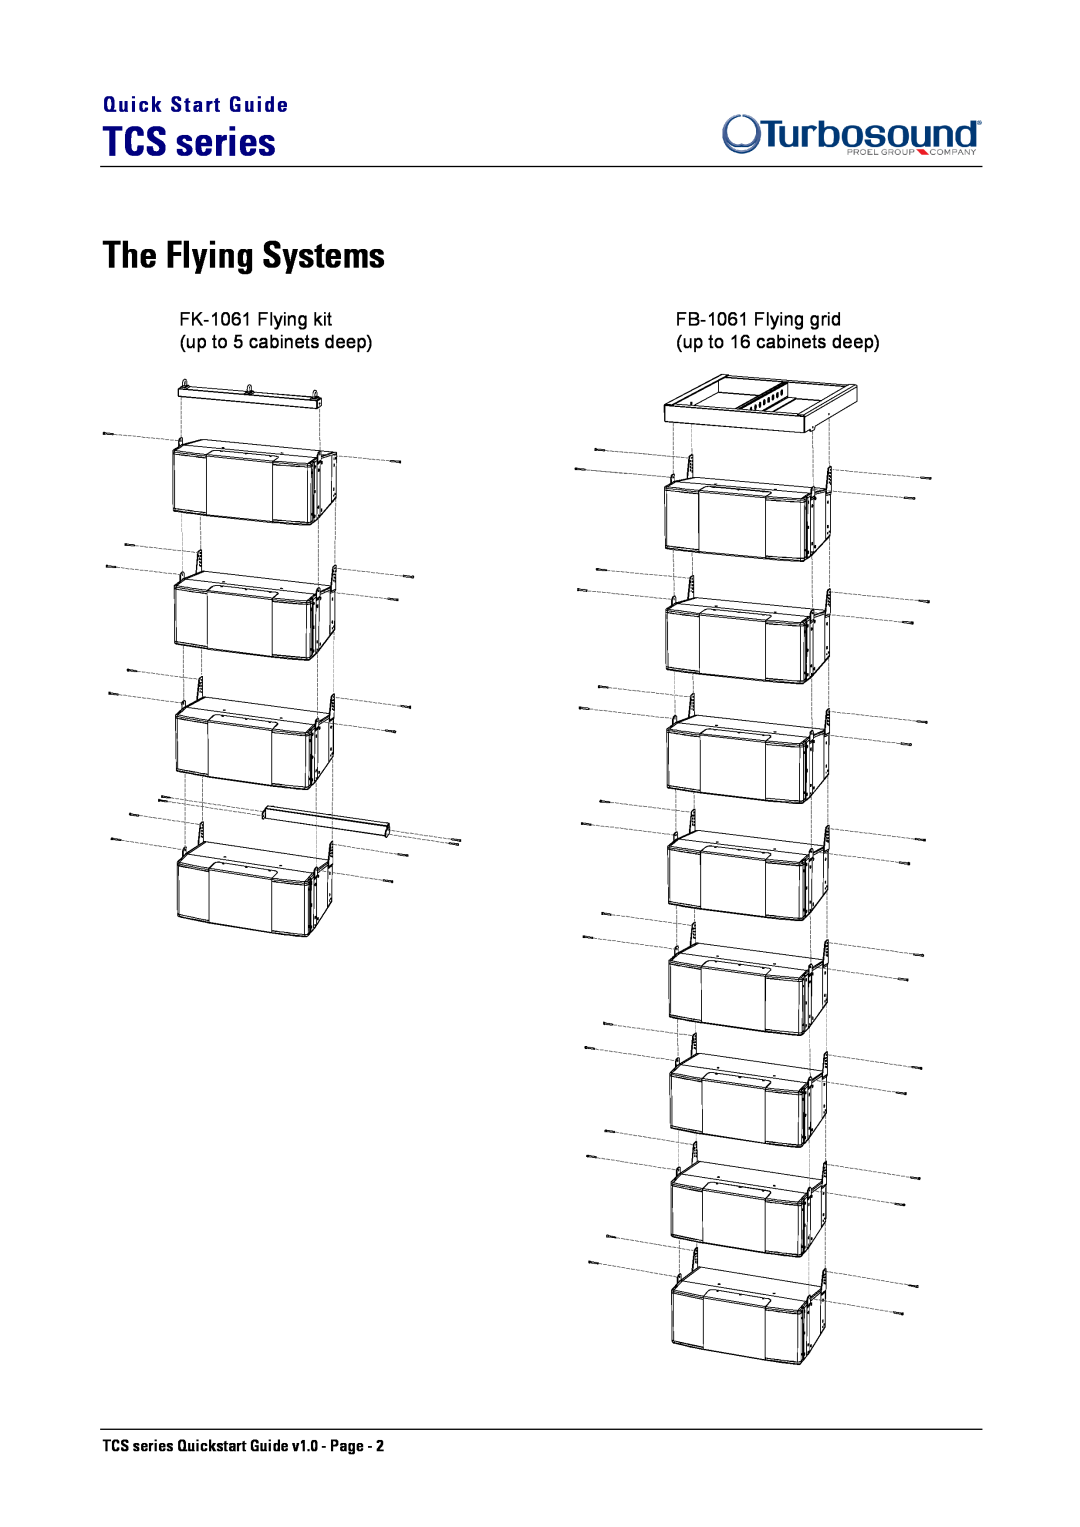 Turbosound TCS-1061 The Flying Systems, Quick Start Guide, TCS series Quickstart Guide v1.0 - Page, FK-1061Flying kit 